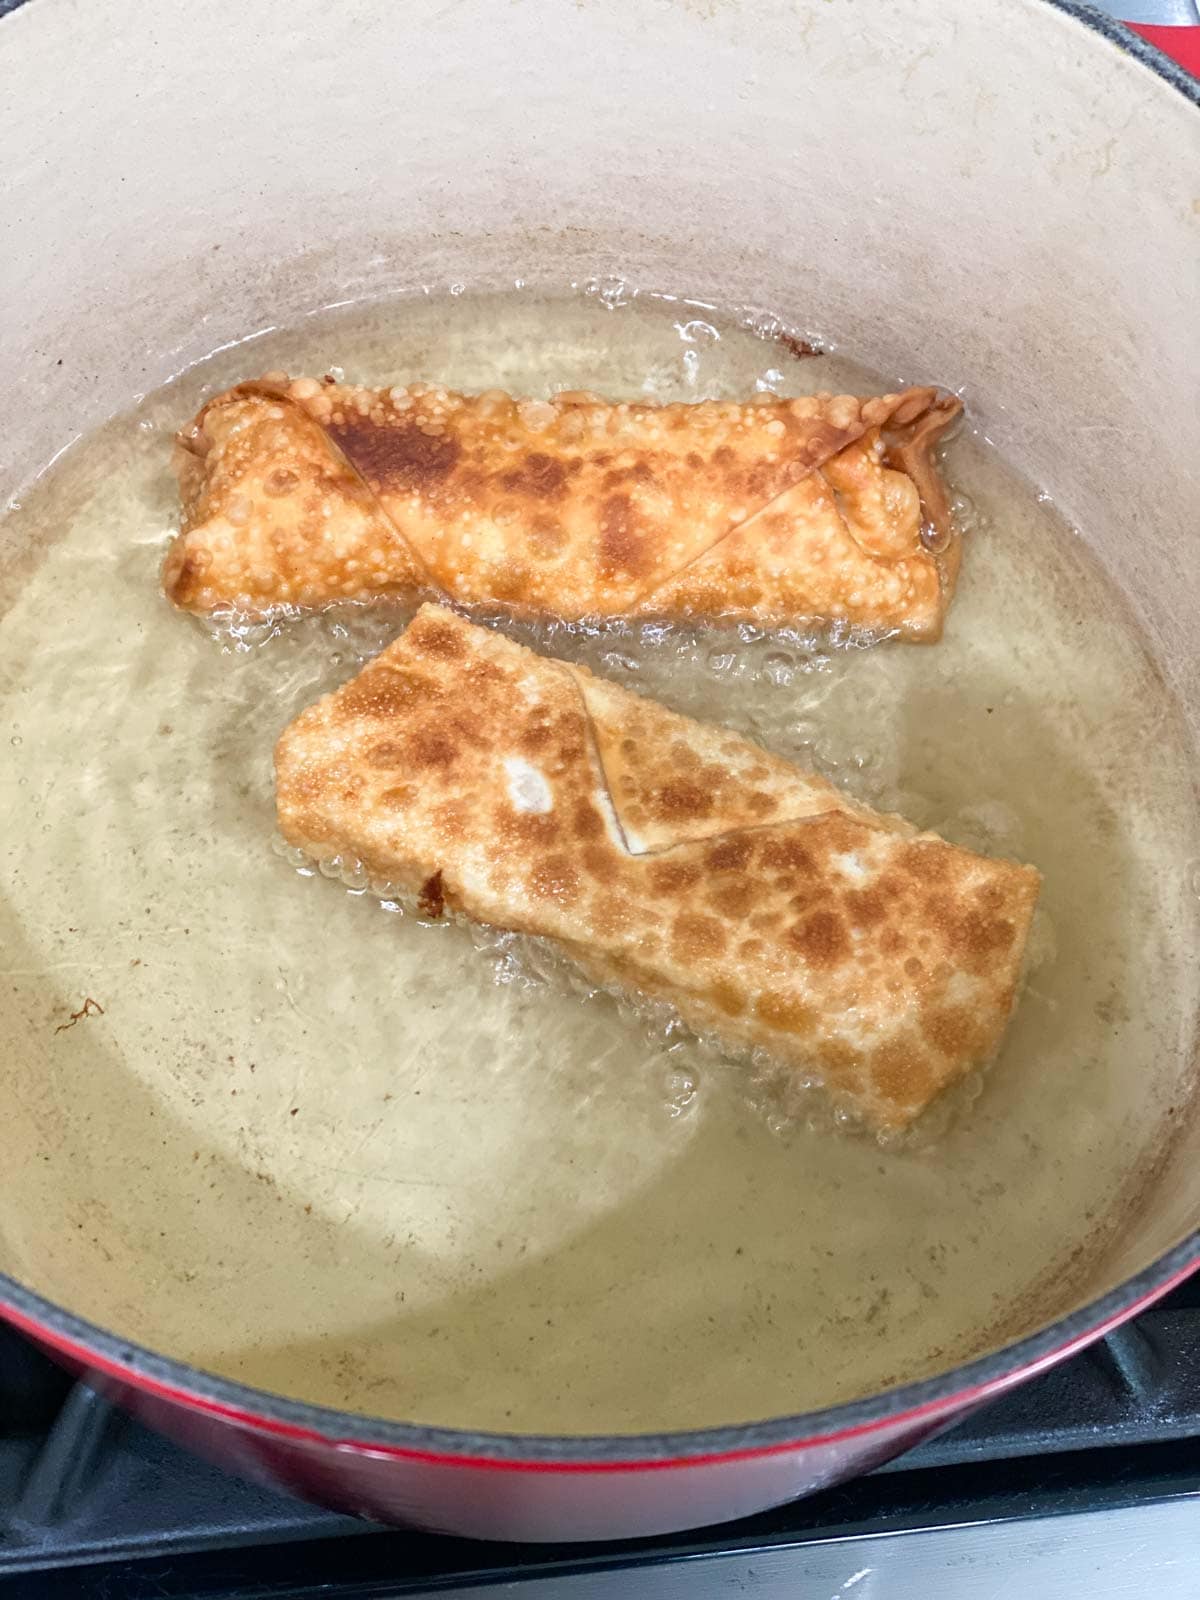 Two egg rolls being fried in oil.